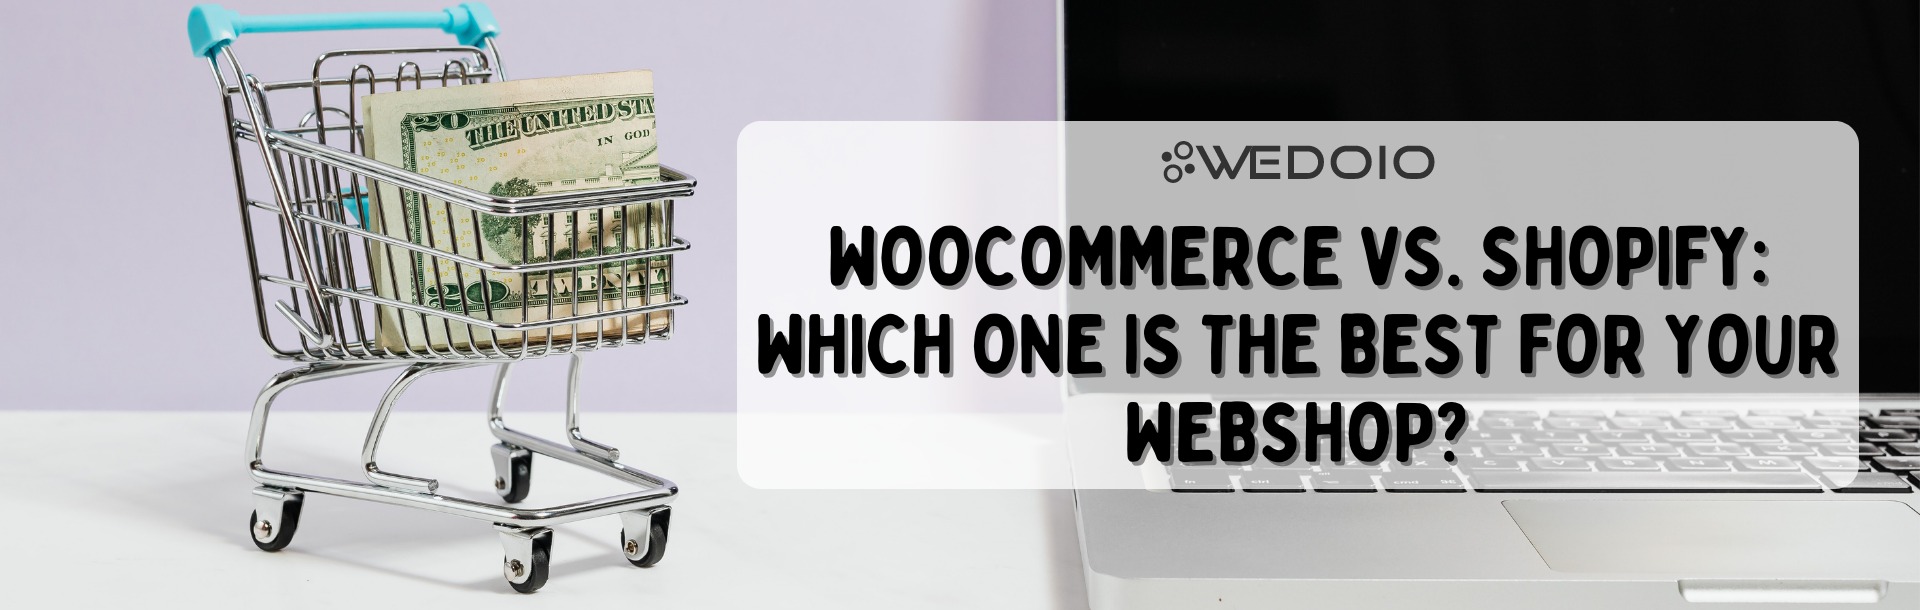 WooCommerce vs. Shopify: which one is the best for your webshop?